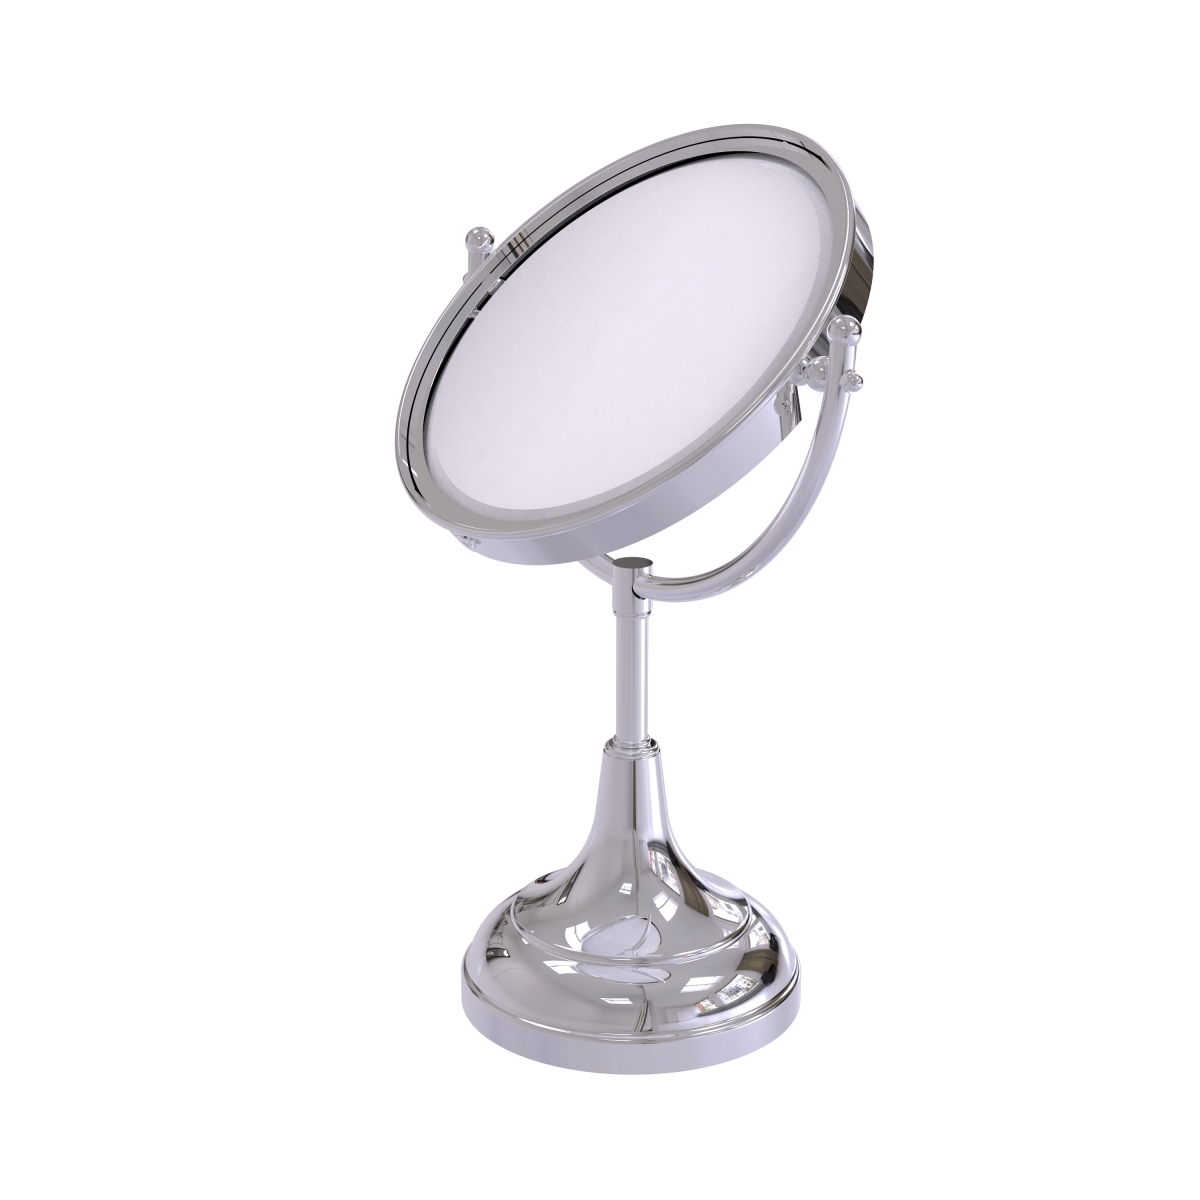 Picture of Allied Brass DM-2-2X-PC 8 in. Vanity Top Make-Up Mirror 2X Magnification, Polished Chrome - 15 x 8 x 8 in.